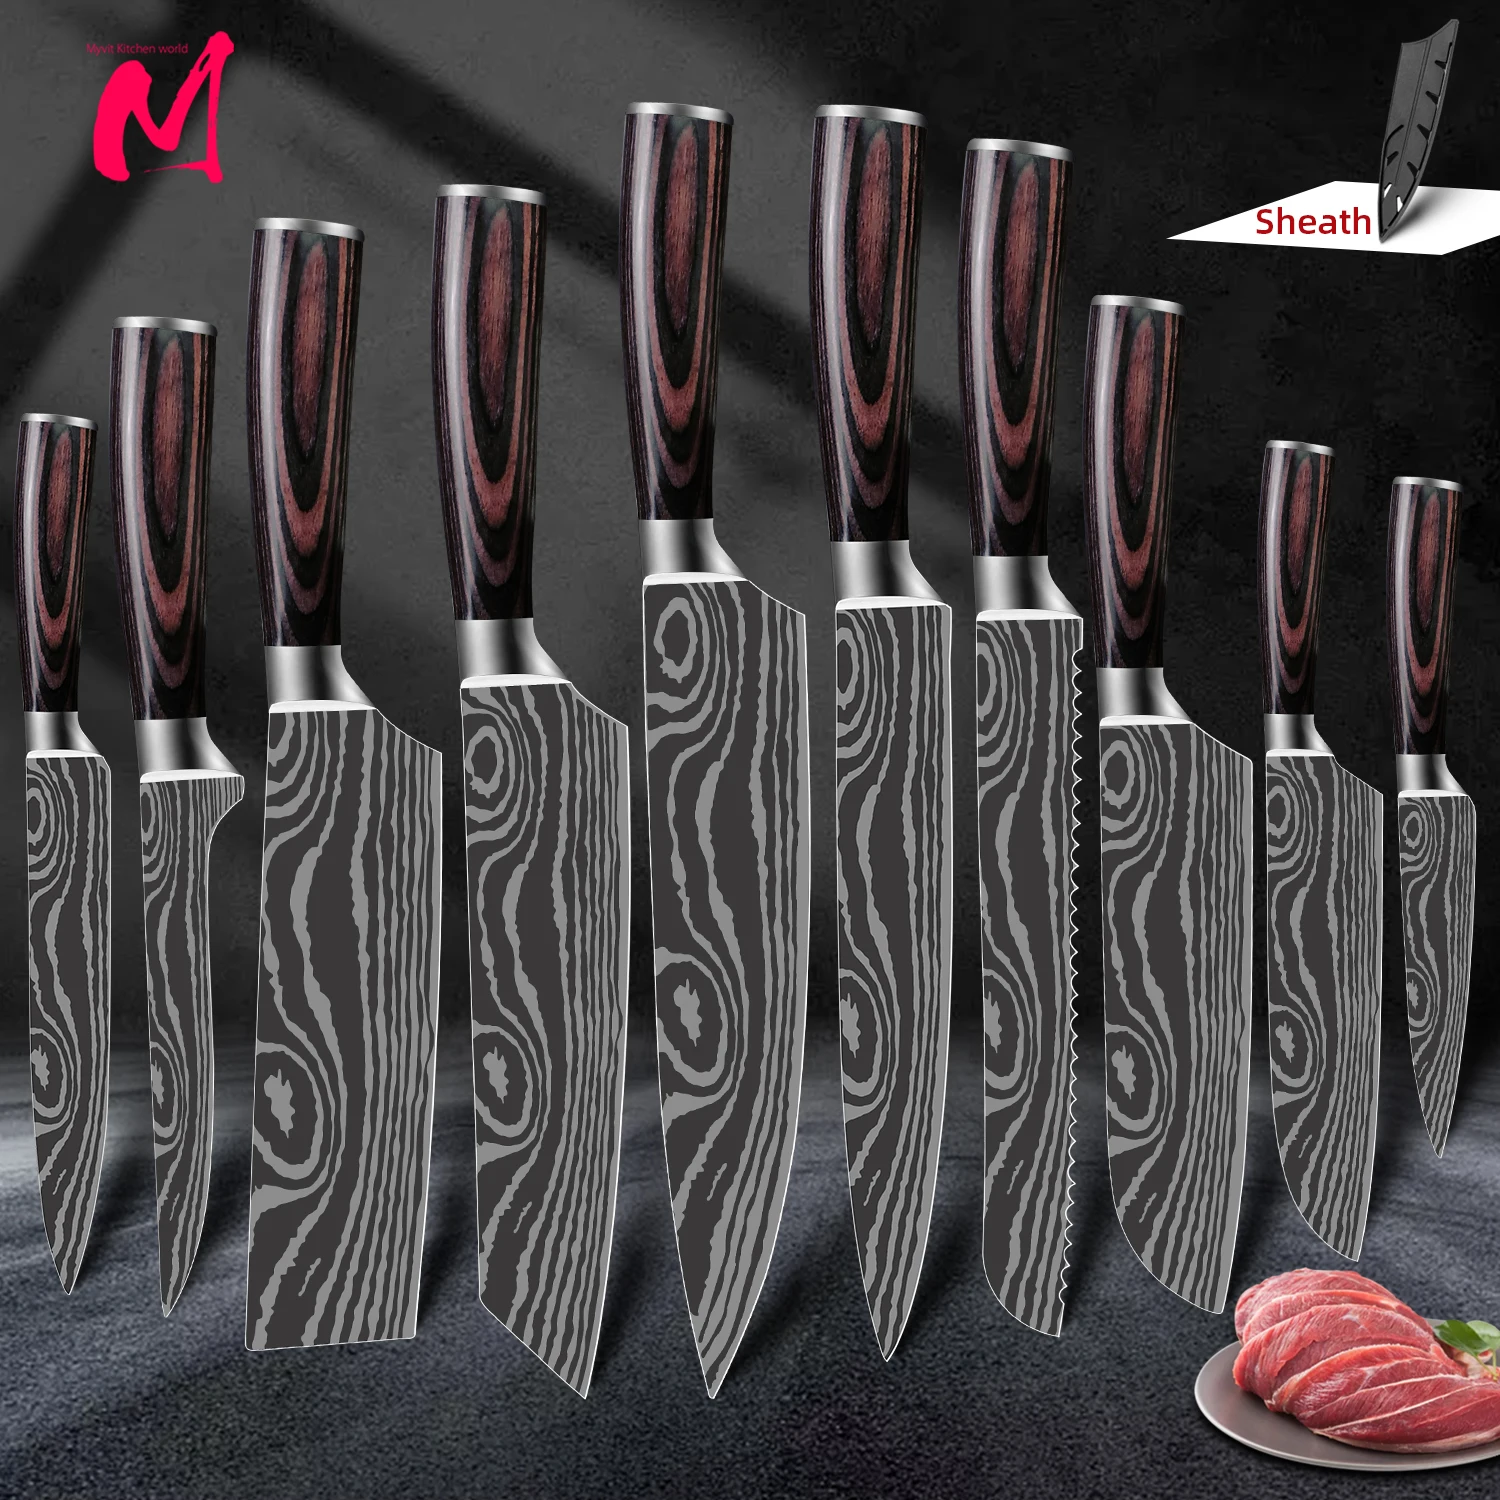 kitchen knives 1-10pcs 7CR17 High Carbon Stainless Steel Damascus Drawing Gyuto Cleaver Set Slicer Santoku Knife Chef knife